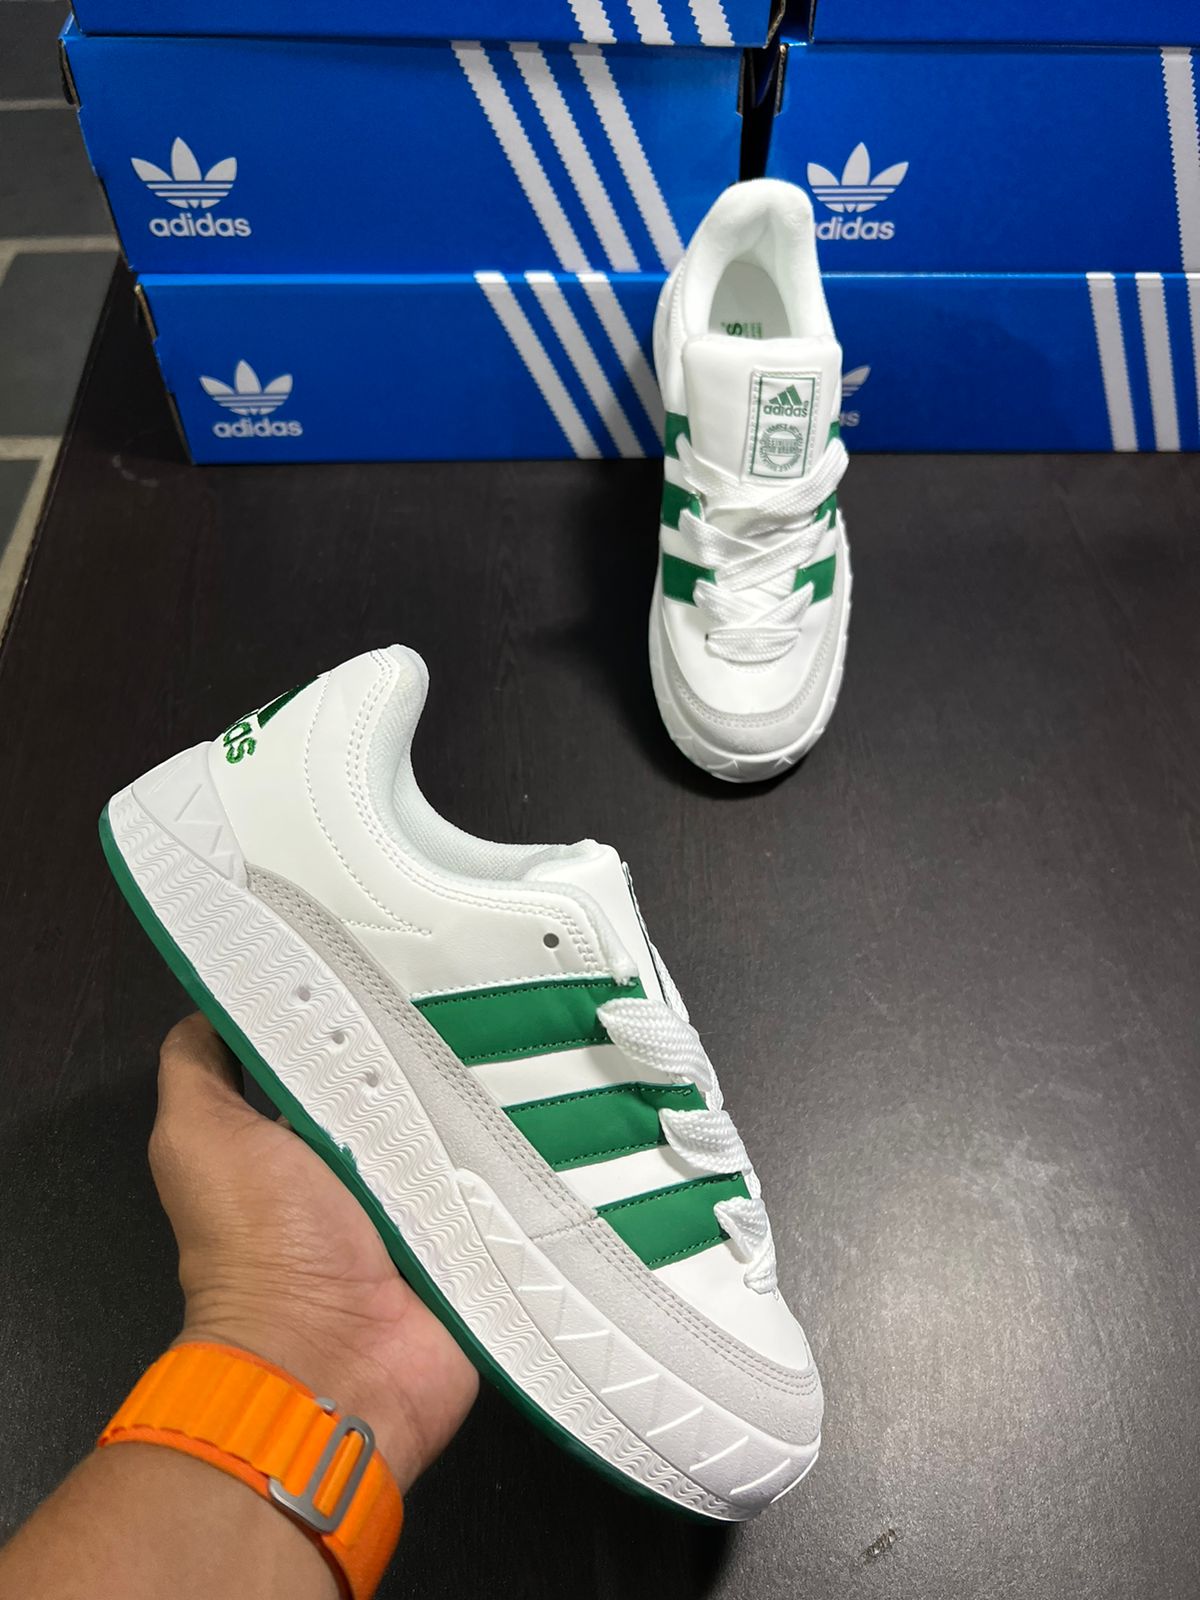 Where can I get Adidas replica shoes in India? - Quora